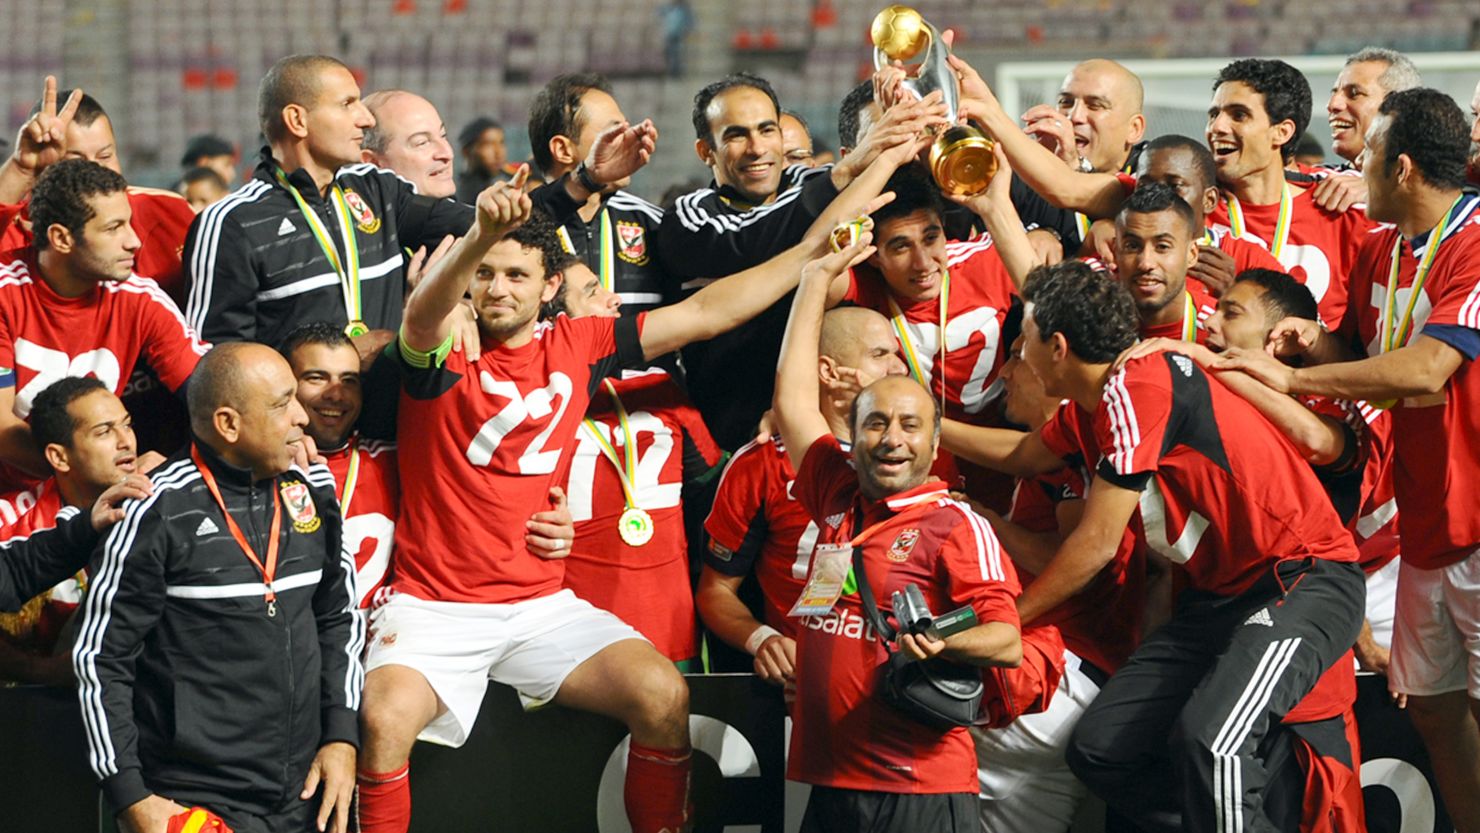 Egypt's Al-Ahly team pose with the African Champions League trophy after winning 2-1 against Esperance de Tunis.